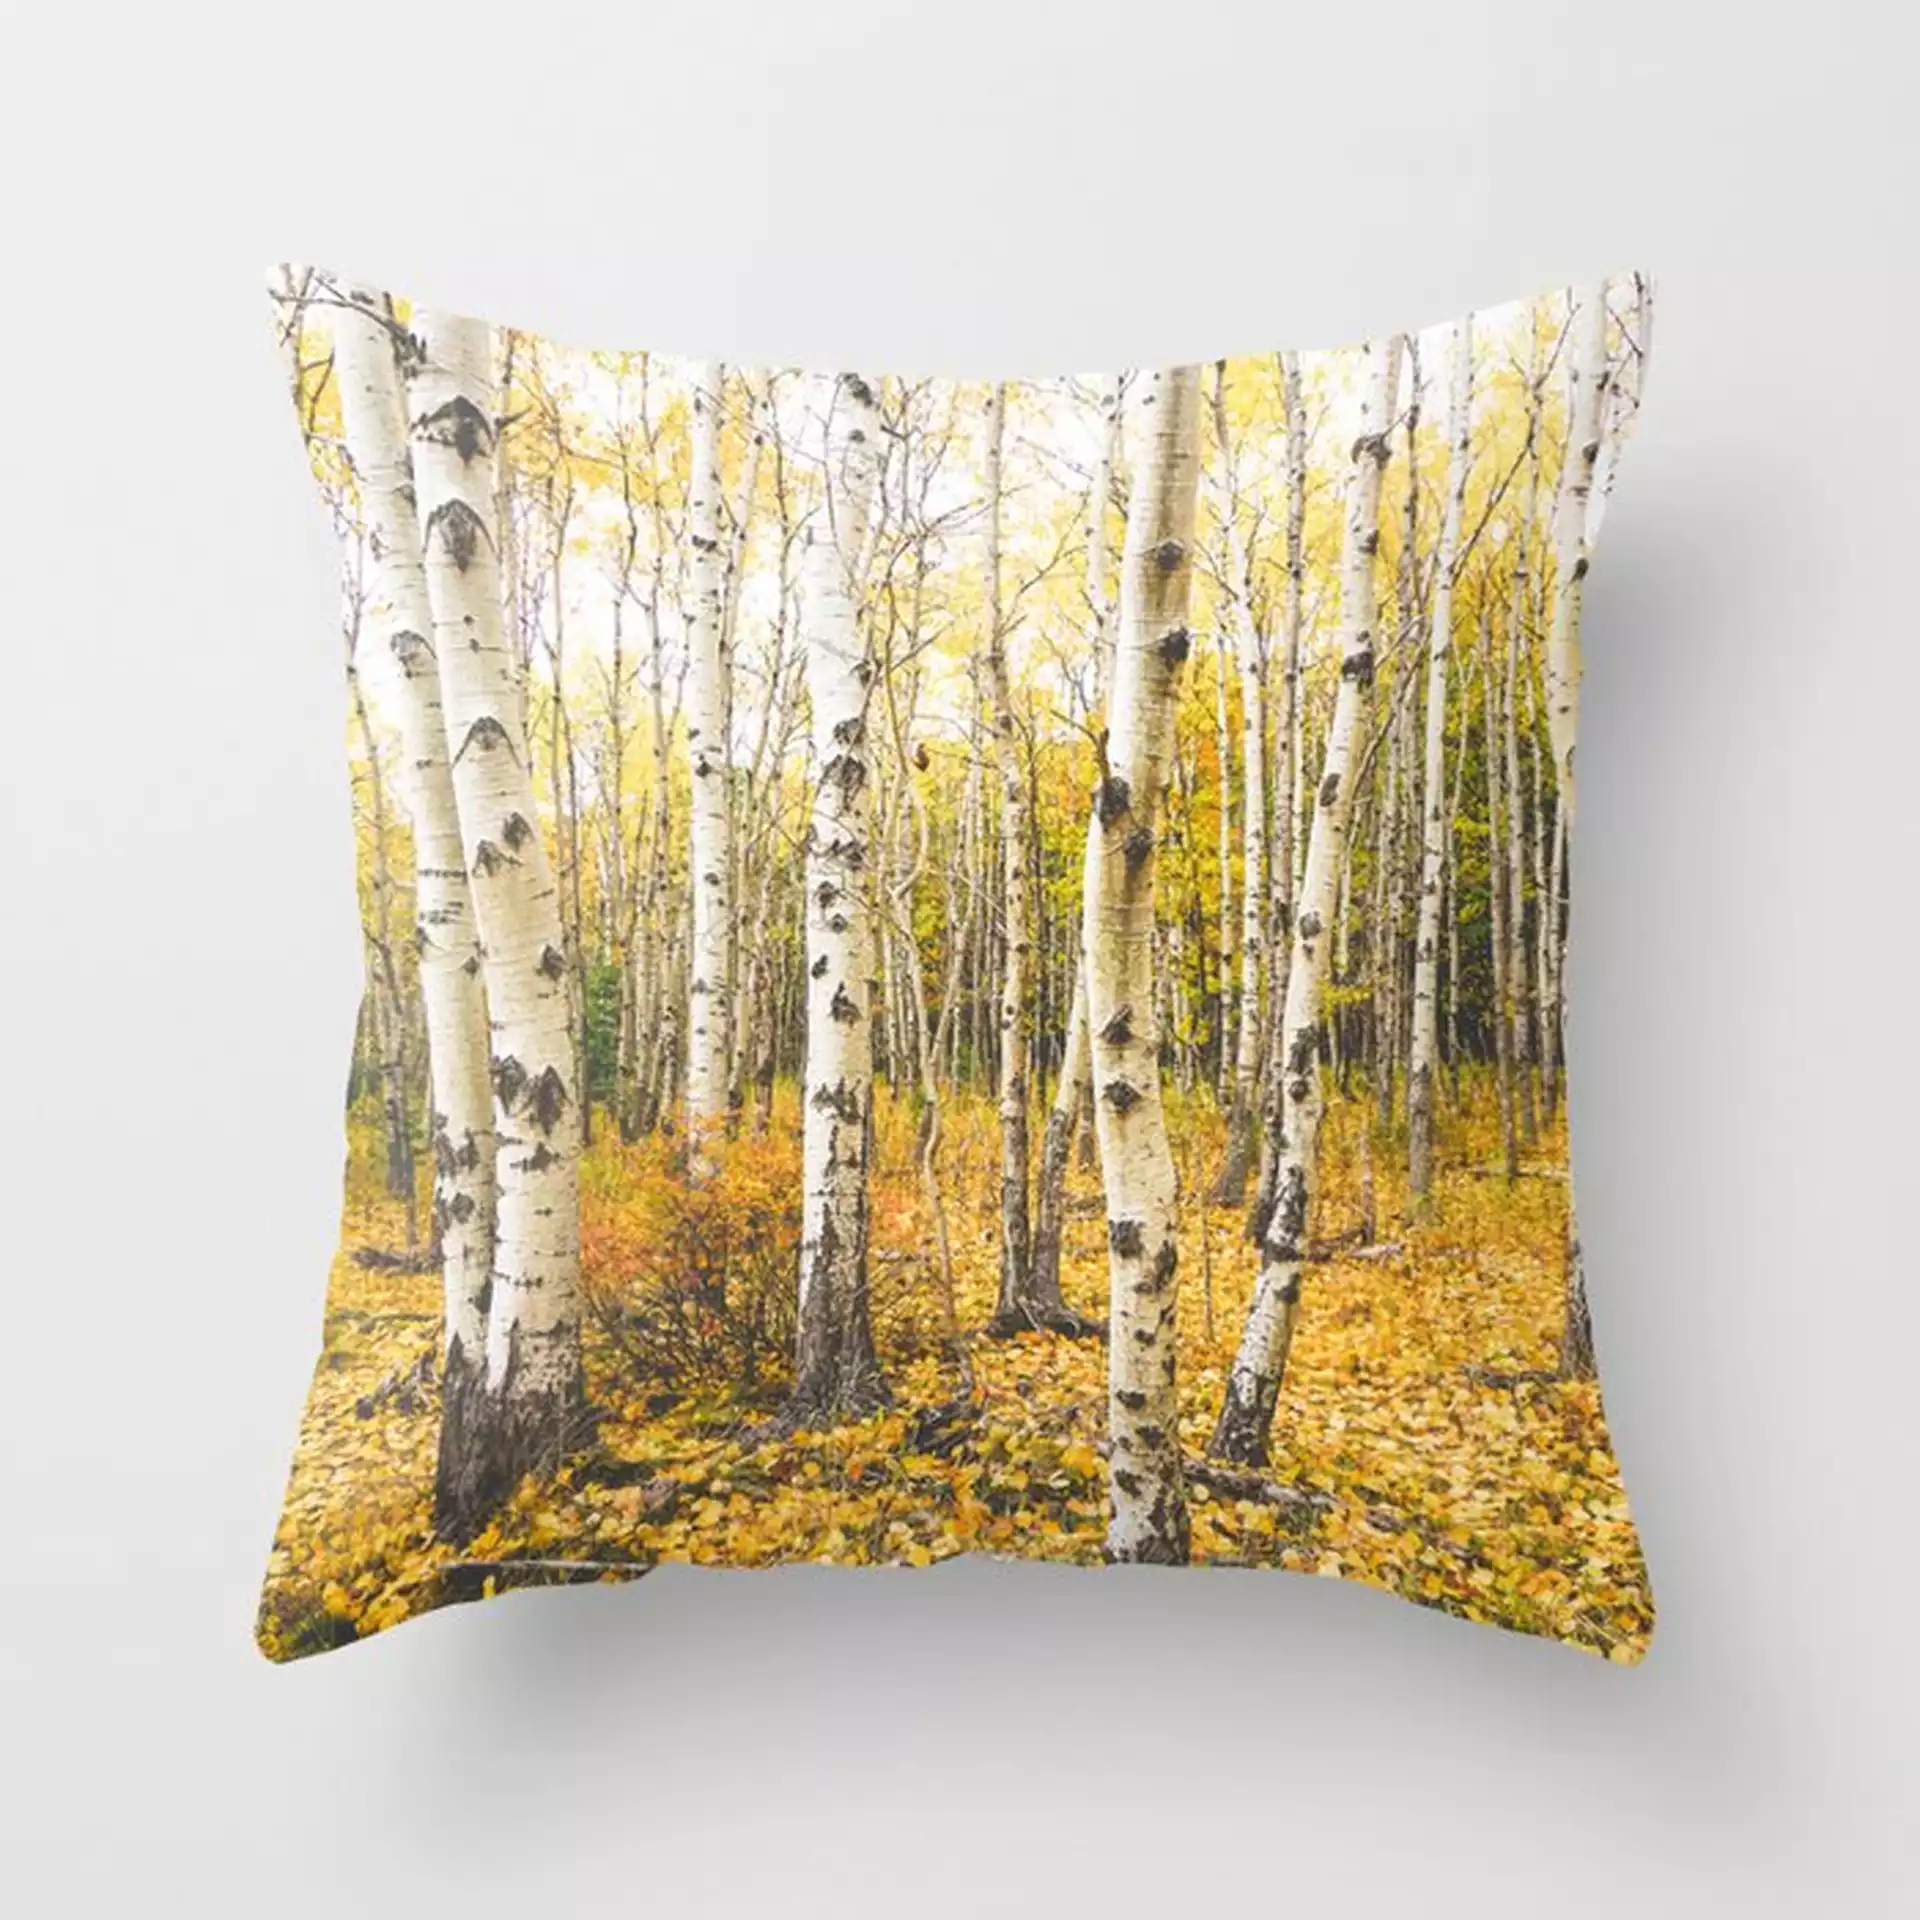 Autumn Birch Forest Couch Throw Pillow by Olivia Joy St.claire - Cozy Home Decor, - Cover (24" x 24") with pillow insert - Indoor Pillow